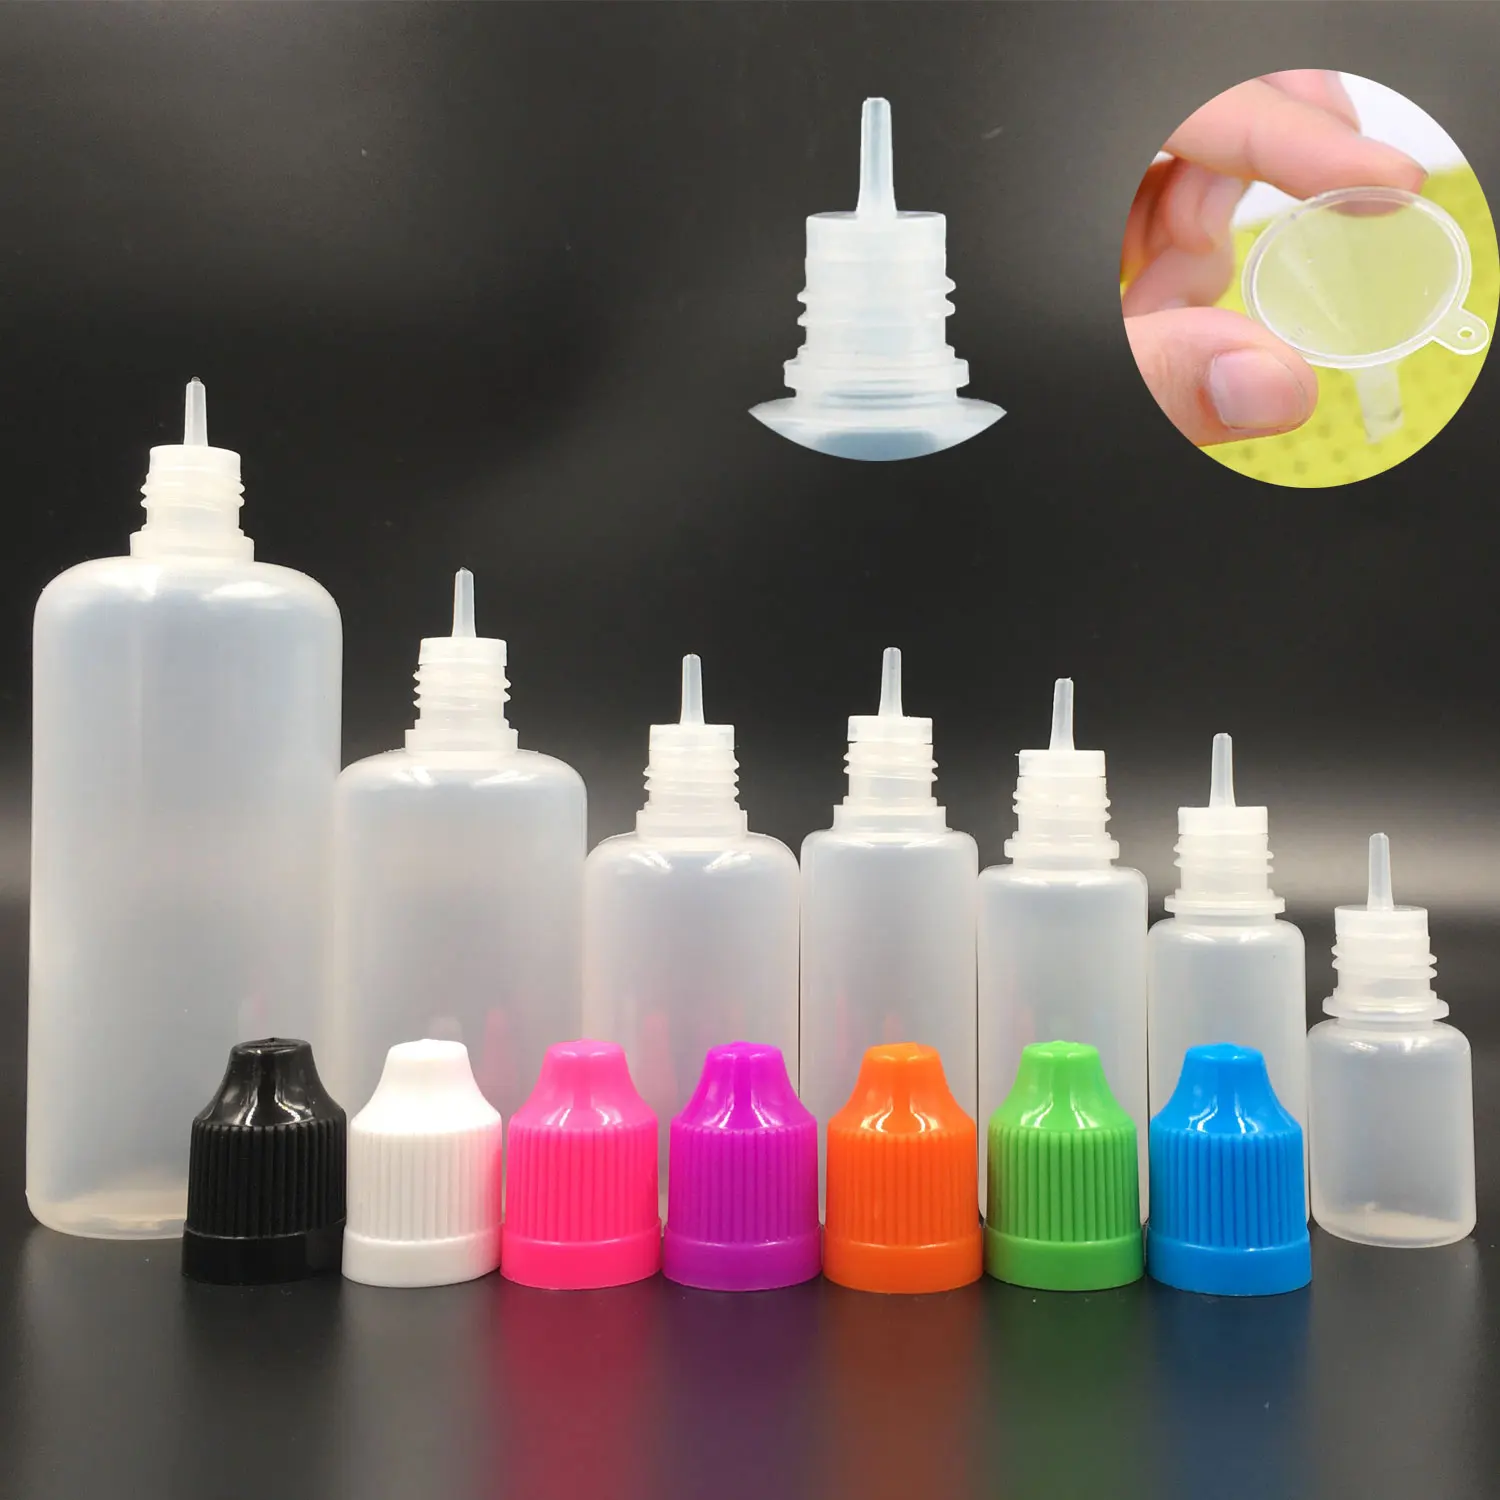 

10PCS X 5ML-30ML Plastic Squeezable Dropper Bottles LDPE Empty E Liquid Juice Oil Eye Jars Containers with Caps Dropper Tips